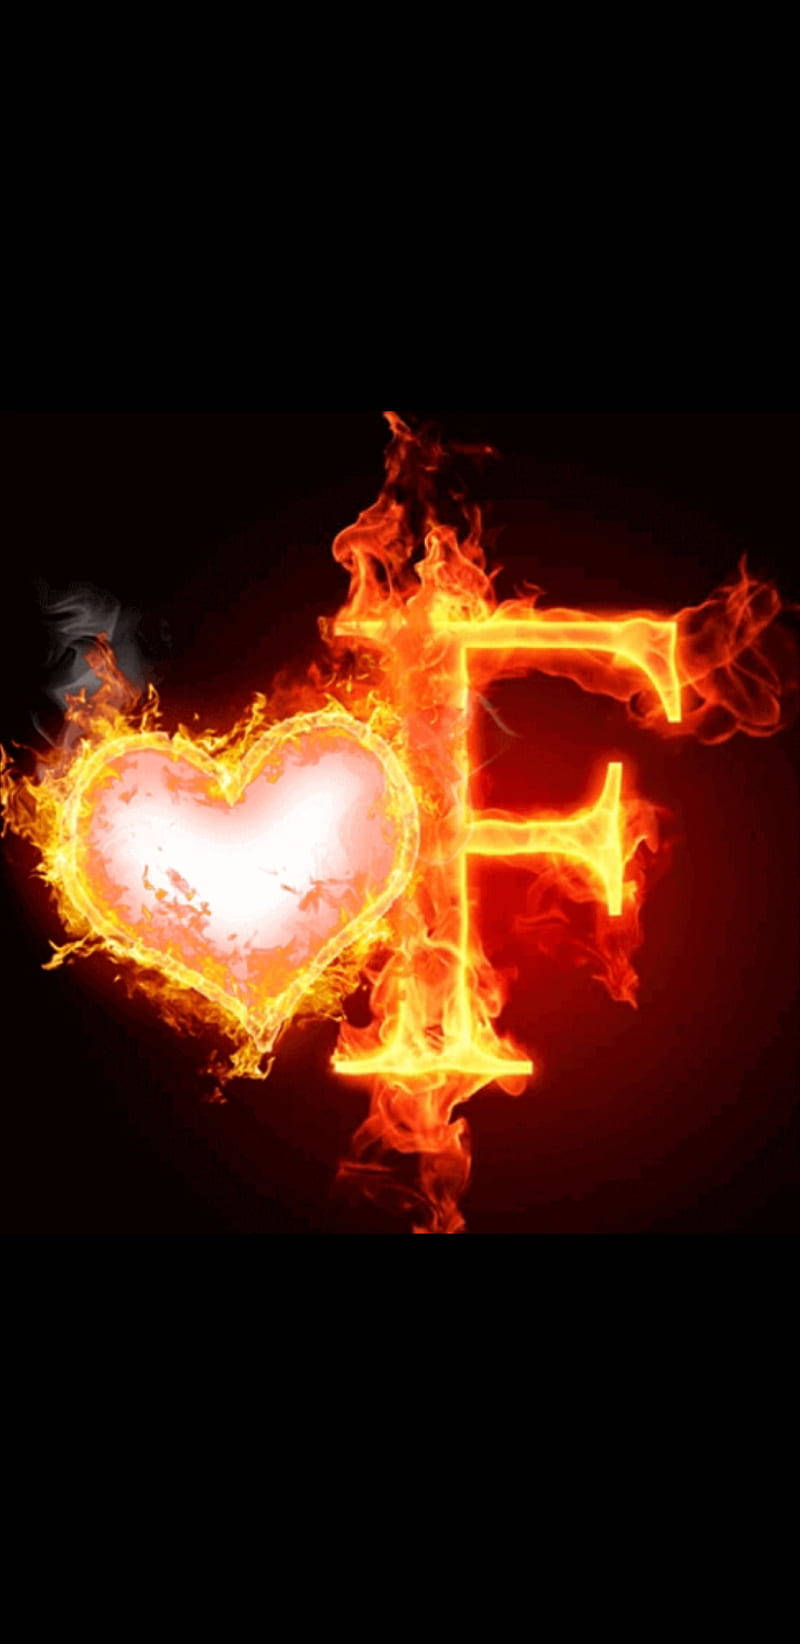 Letter F And Heart On Fire Wallpaper